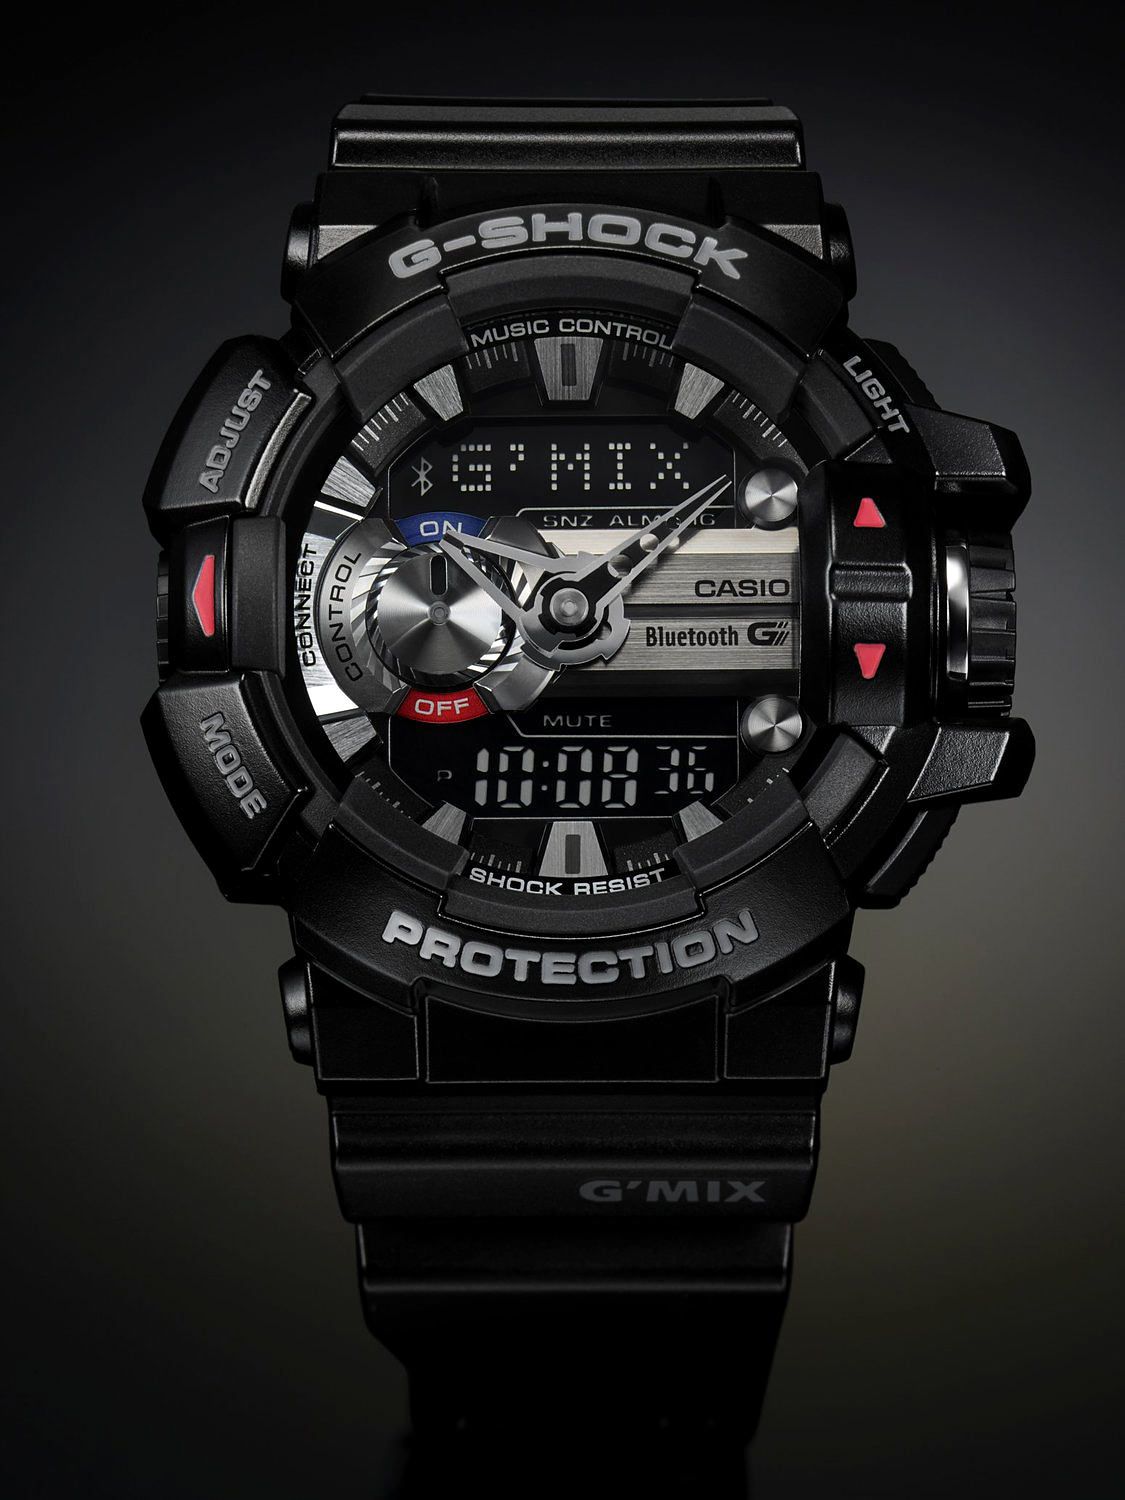 7 Reasons Why You Should Own A Casio G Shock Watch